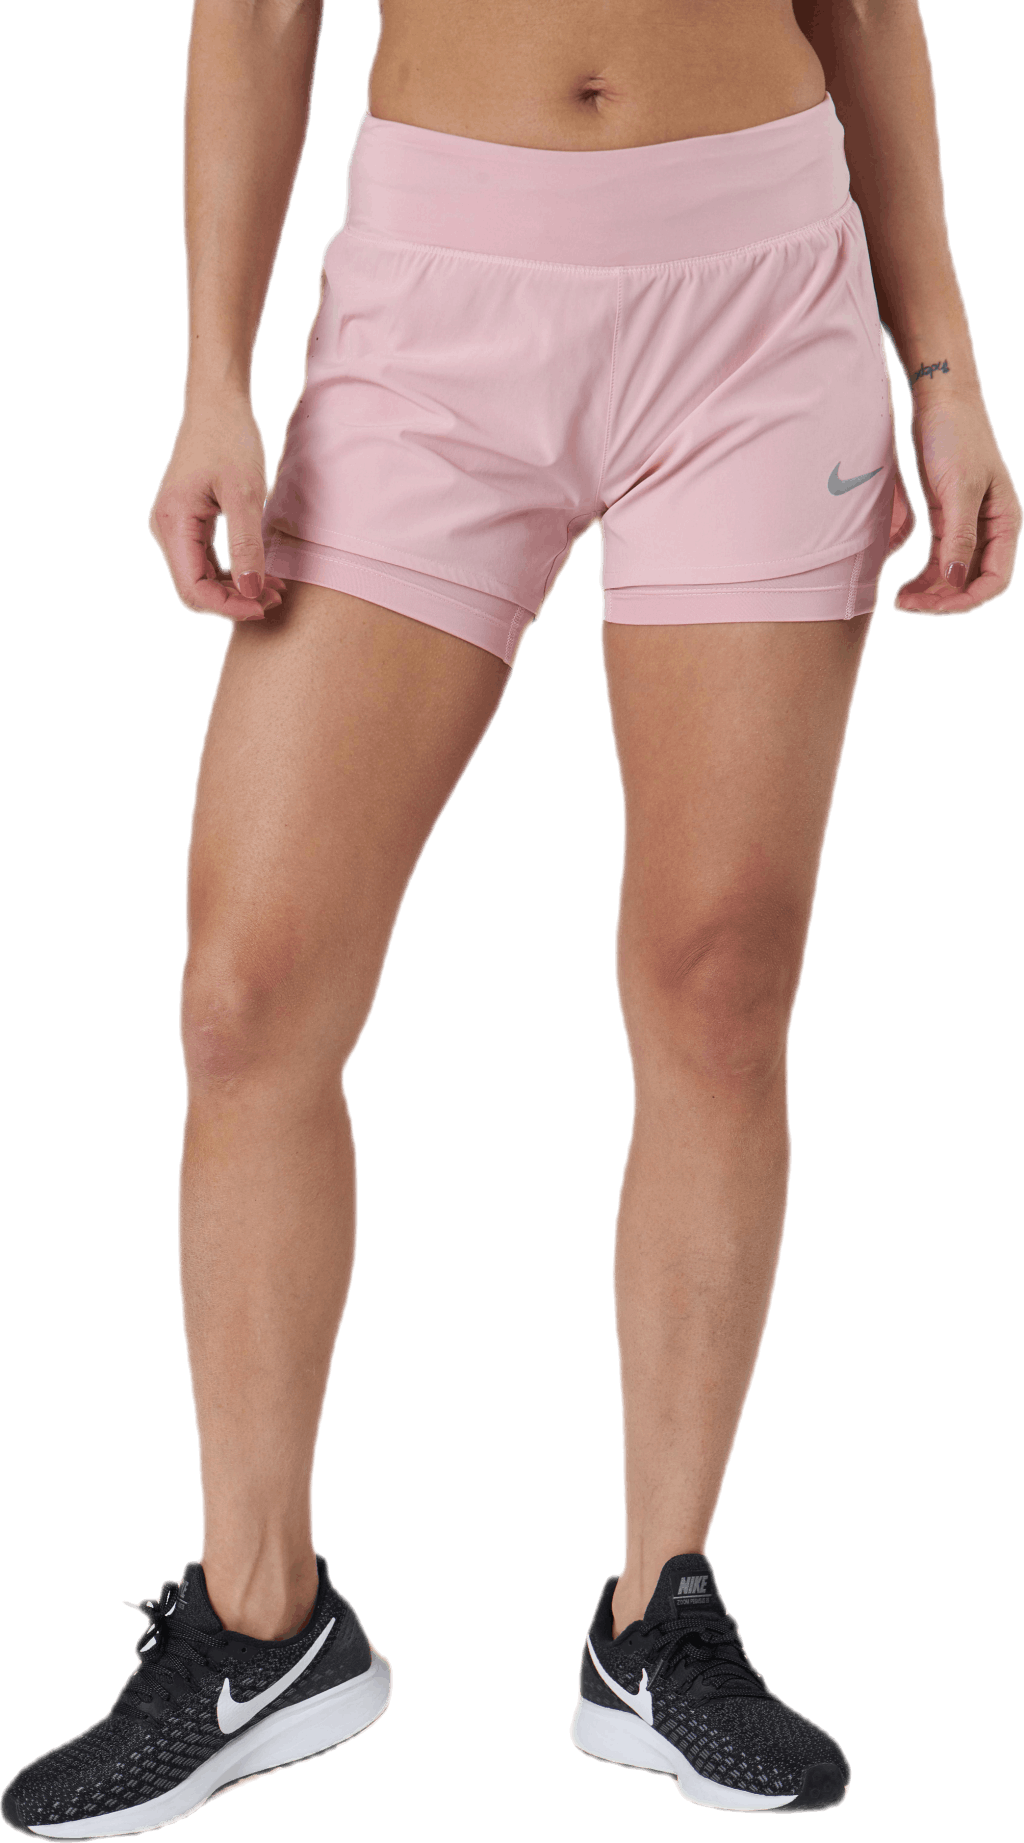 Eclipse 2-In-1 Running Shorts Pink